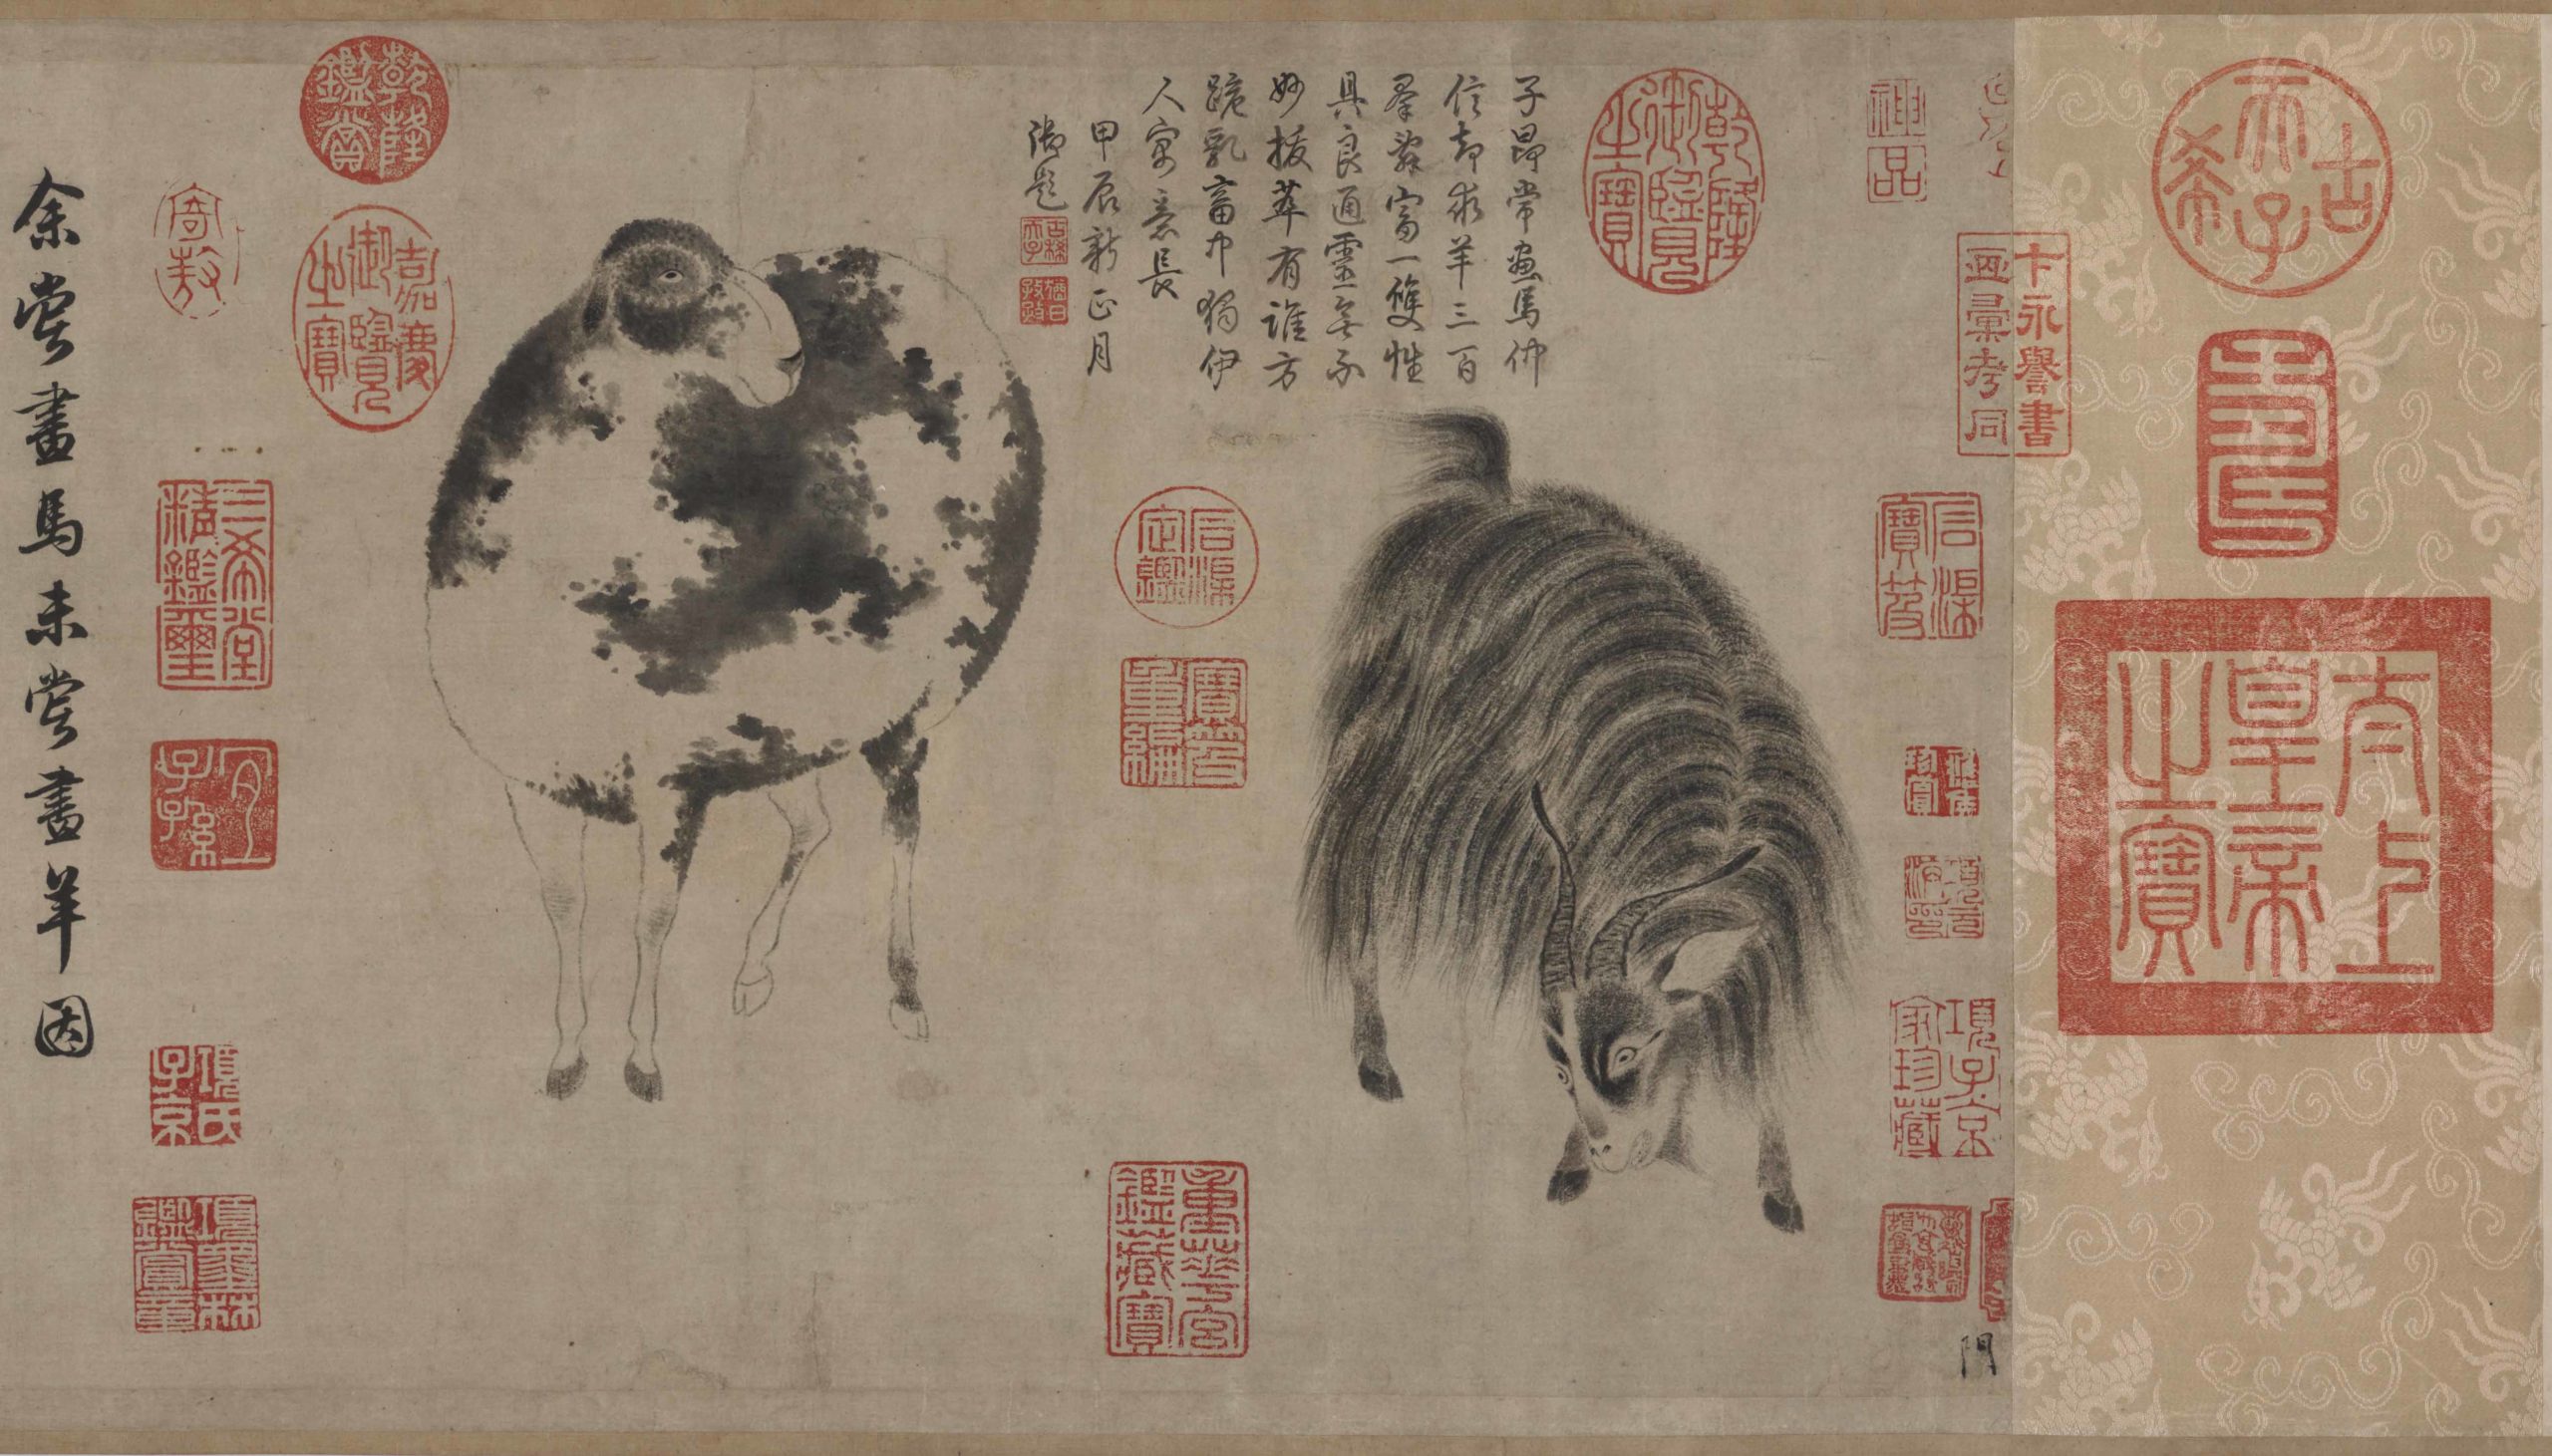 Zhao Mengfu 趙孟頫 (1254–1322), Sheep and Goat (detail), Yuan dynasty, c. 1300, ink on paper, China, 25.2 x 48.7 cm (Freer Gallery of Art, Smithsonian Institution, Washington, DC: Purchase — Charles Lang Freer Endowment, F1931.4)